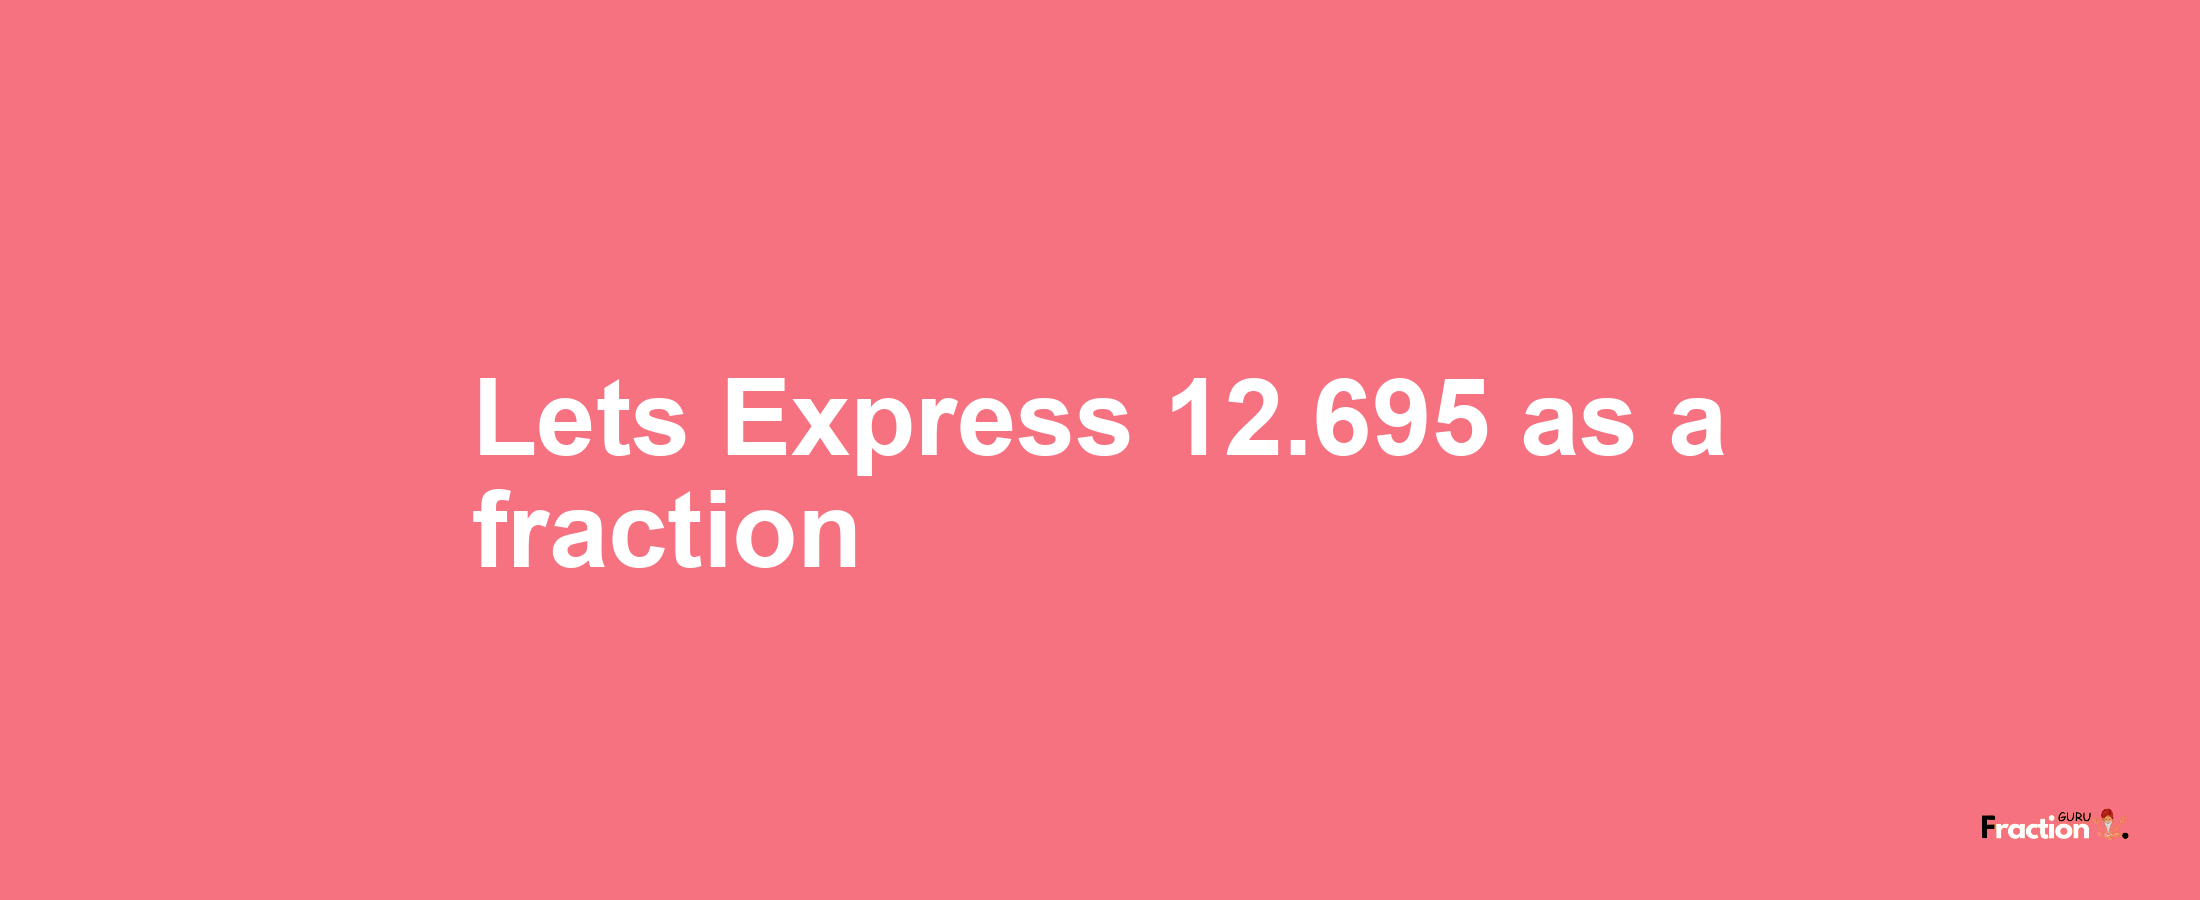 Lets Express 12.695 as afraction